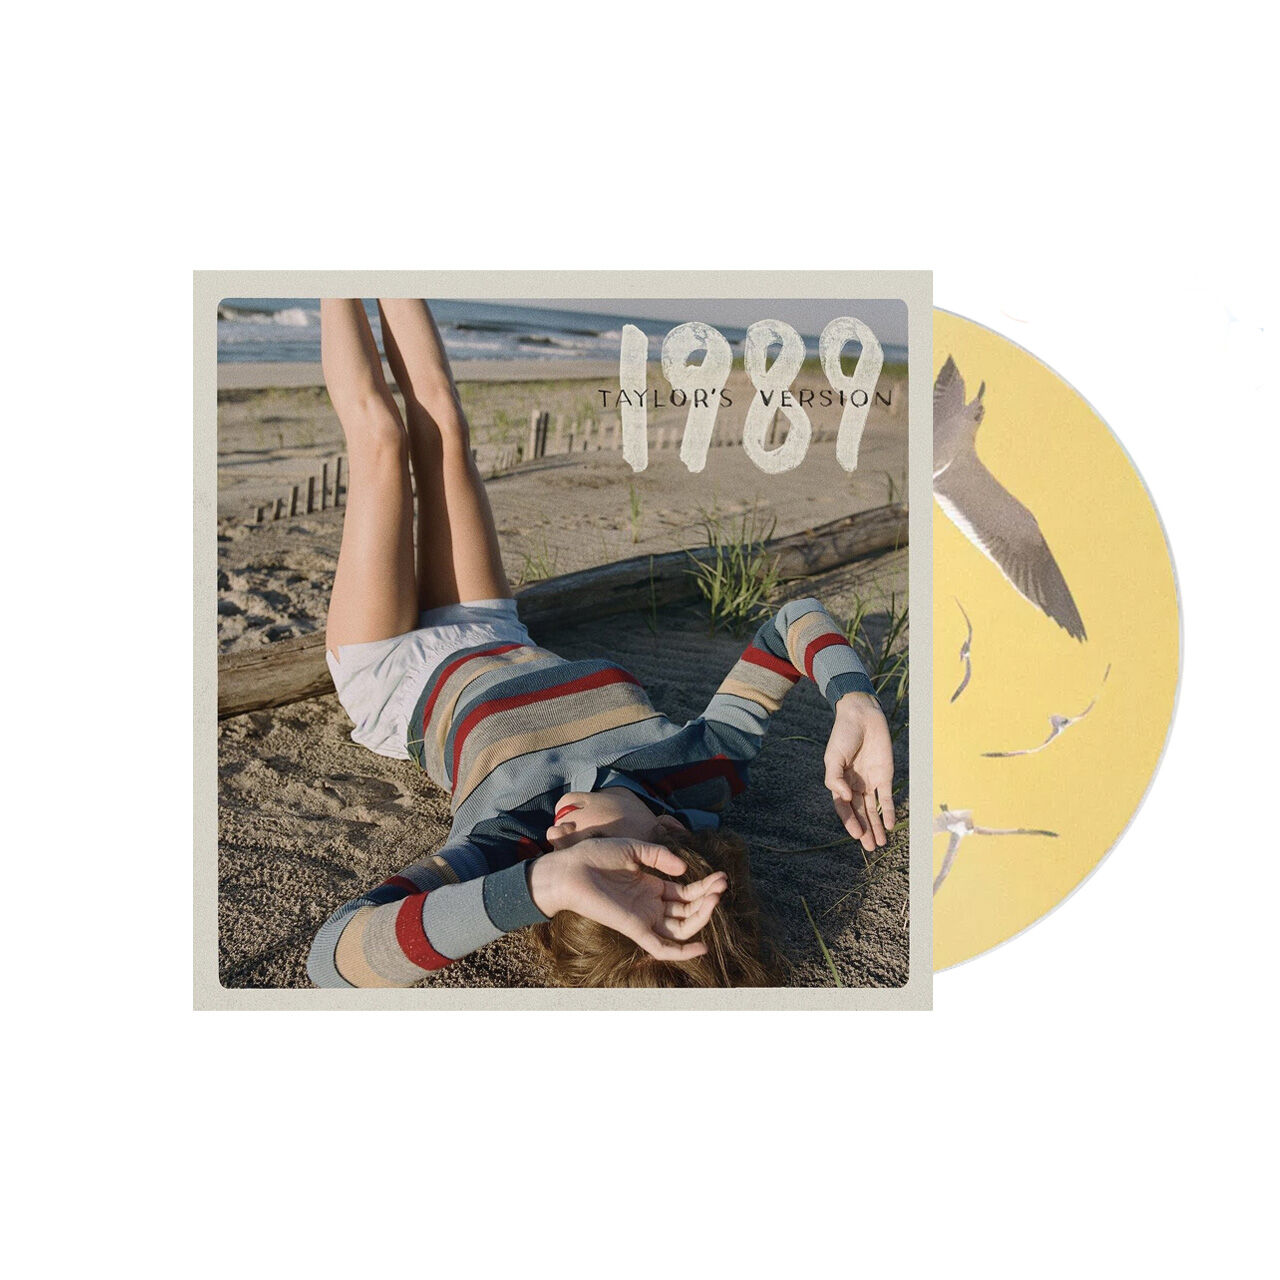 TAYLOR SWIFT 1989 (Taylor's Version) Sunrise Boulevard Yellow Deluxe Edition  CD